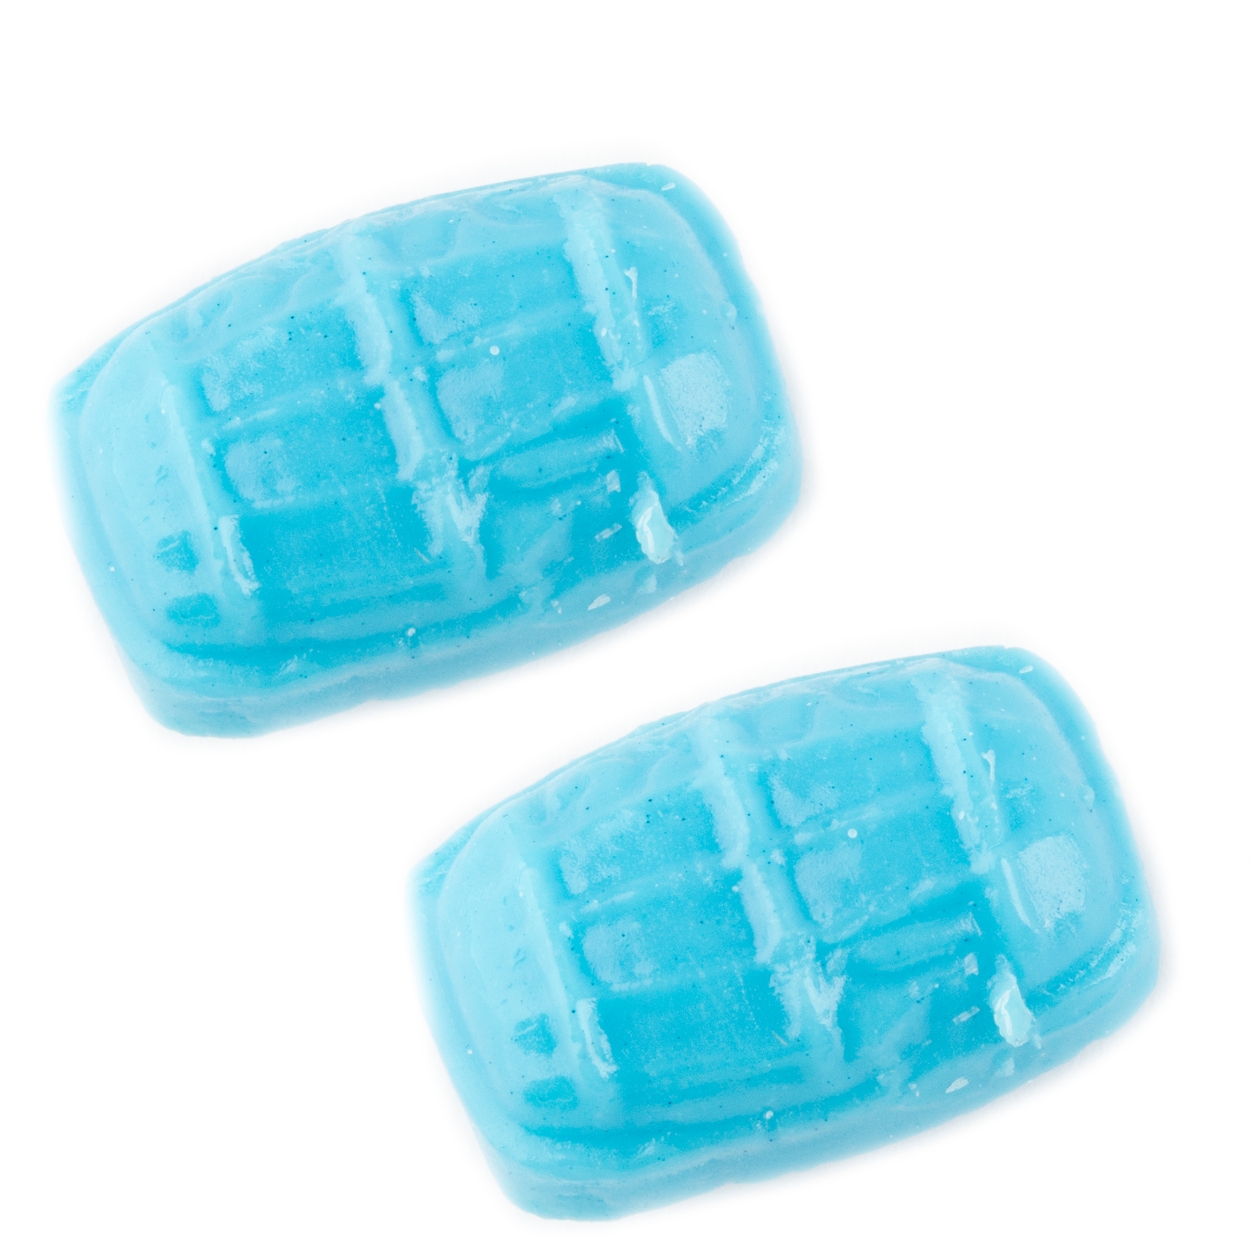 Barrels of Yum - Blue Raspberry • Wrapped Candy • Bulk Candy • Oh! Nuts®